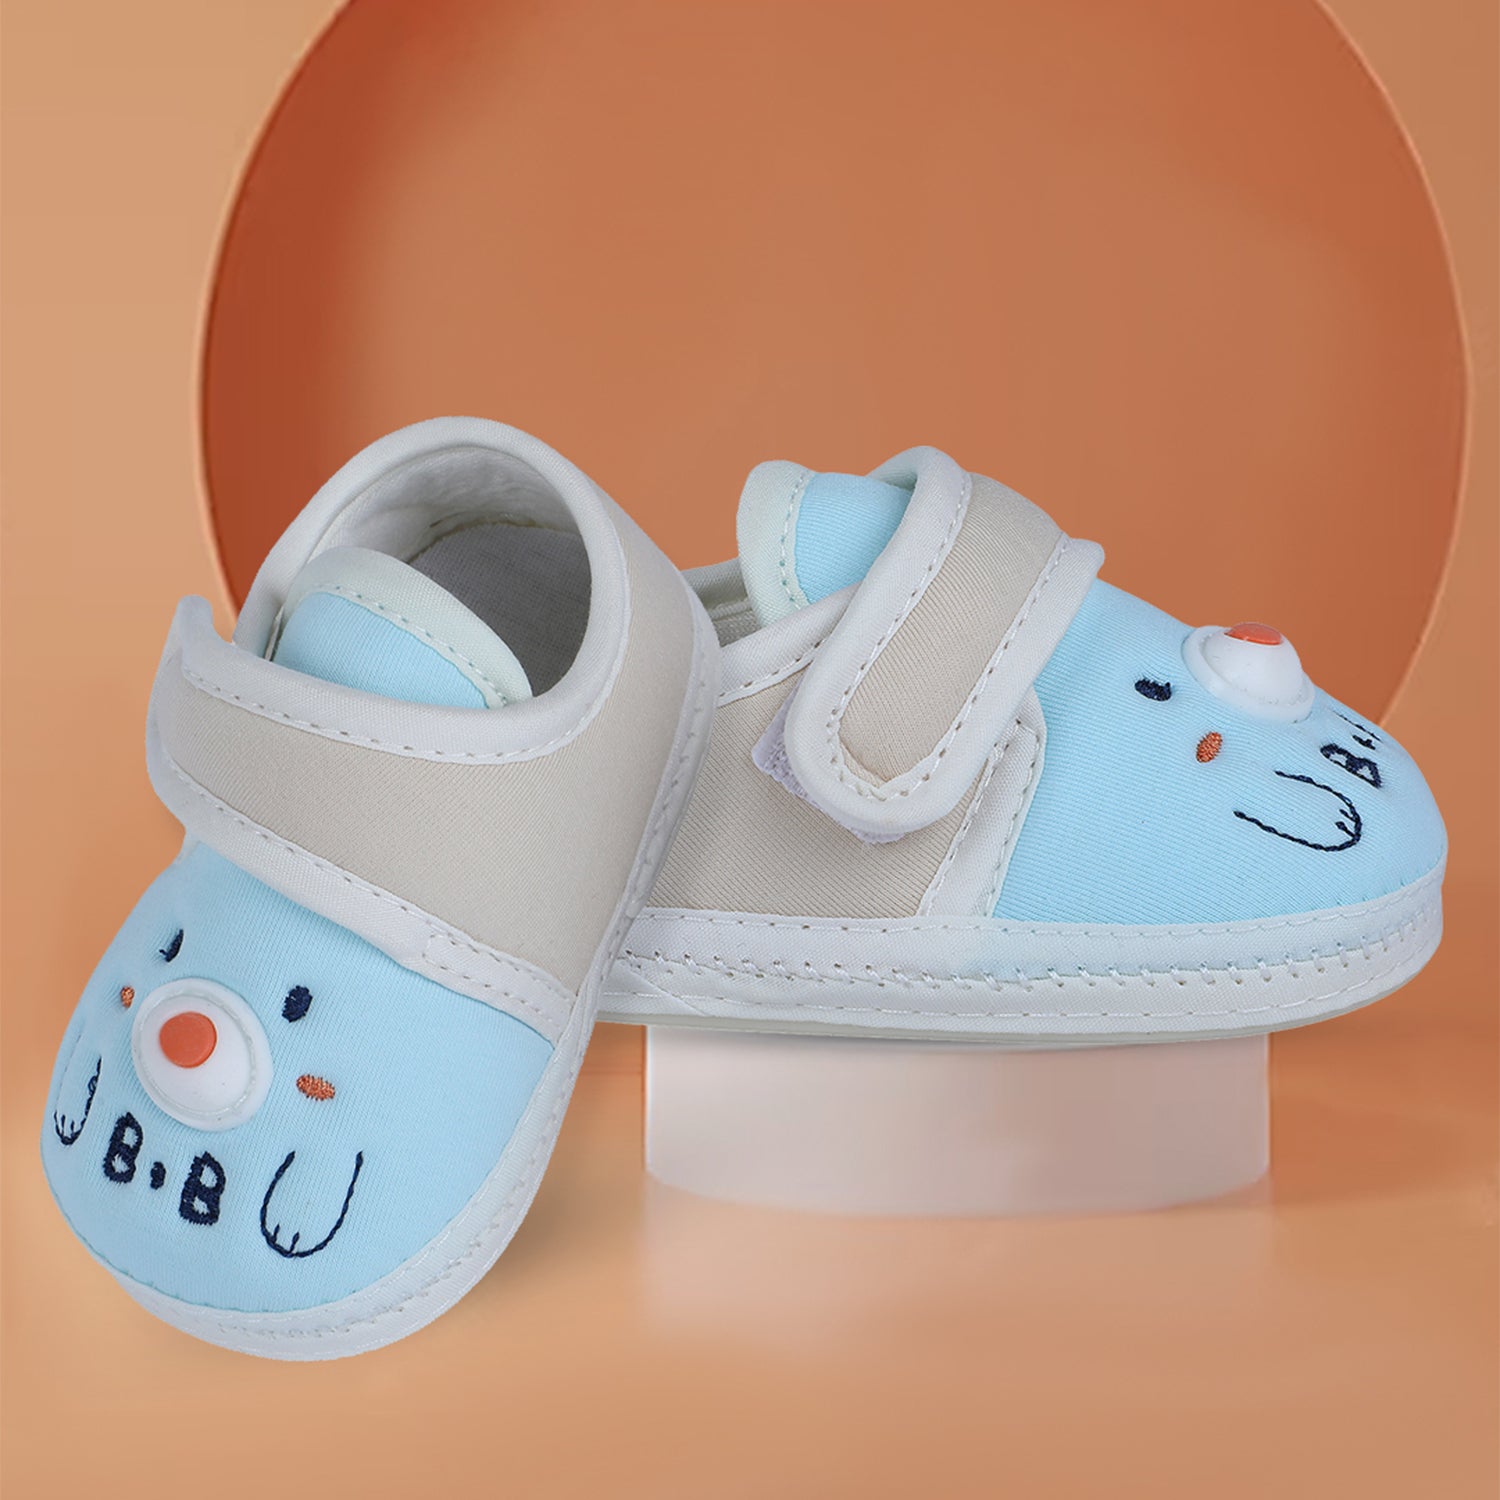 Baby Moo Smiling Bear Soft Sole Anti-Slip Booties - Blue - Baby Moo